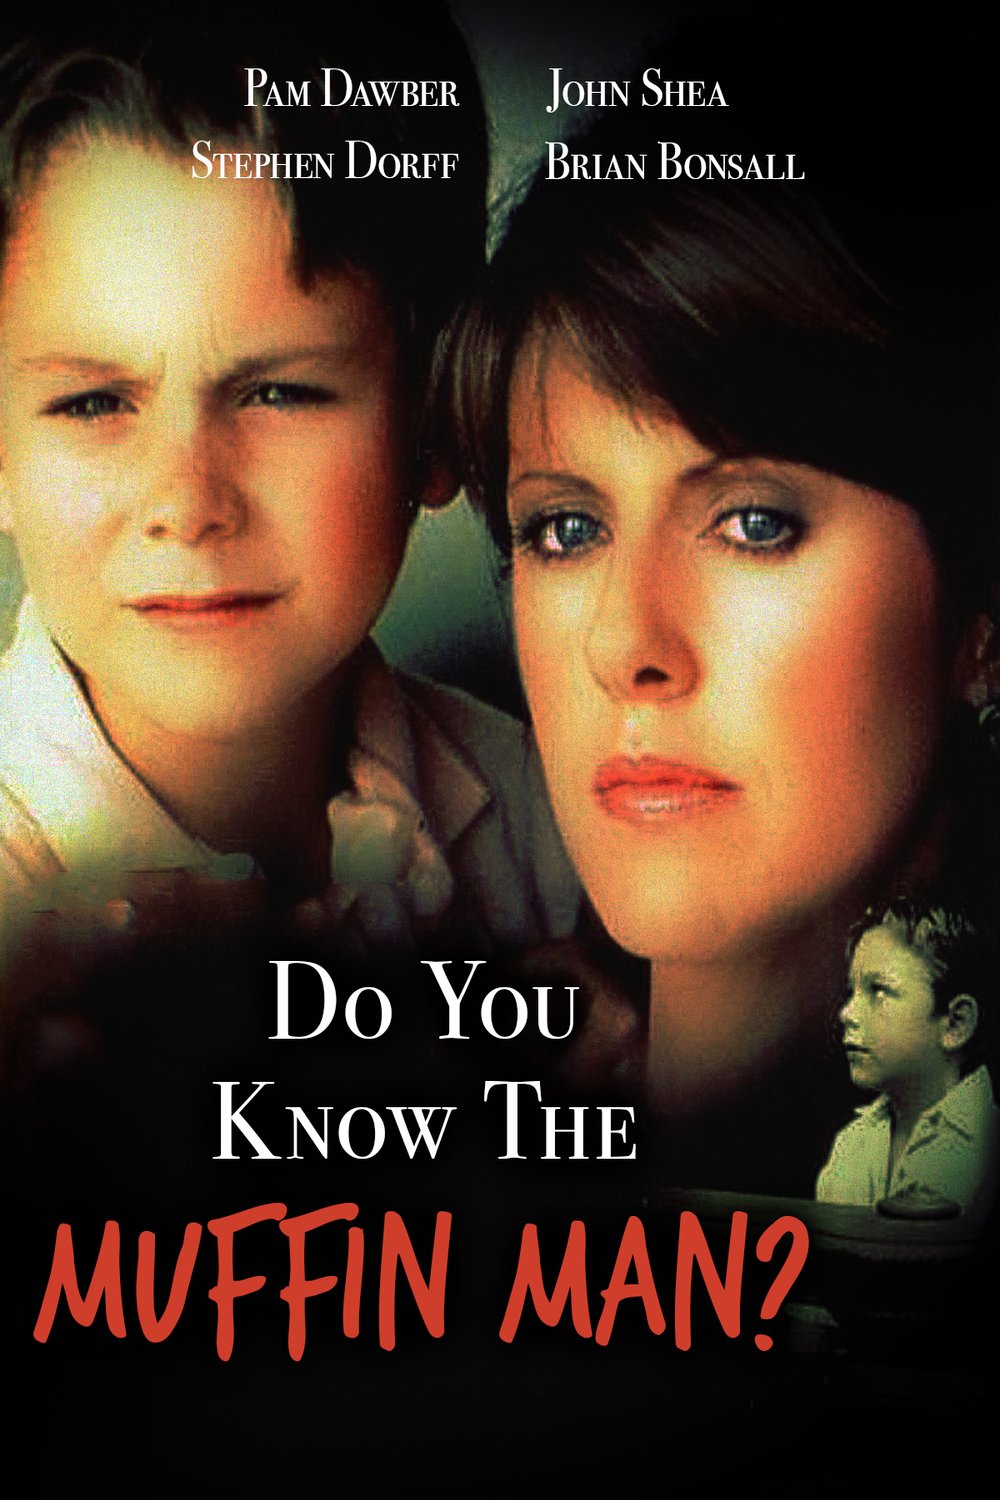 Poster of the movie Do You Know the Muffin Man?